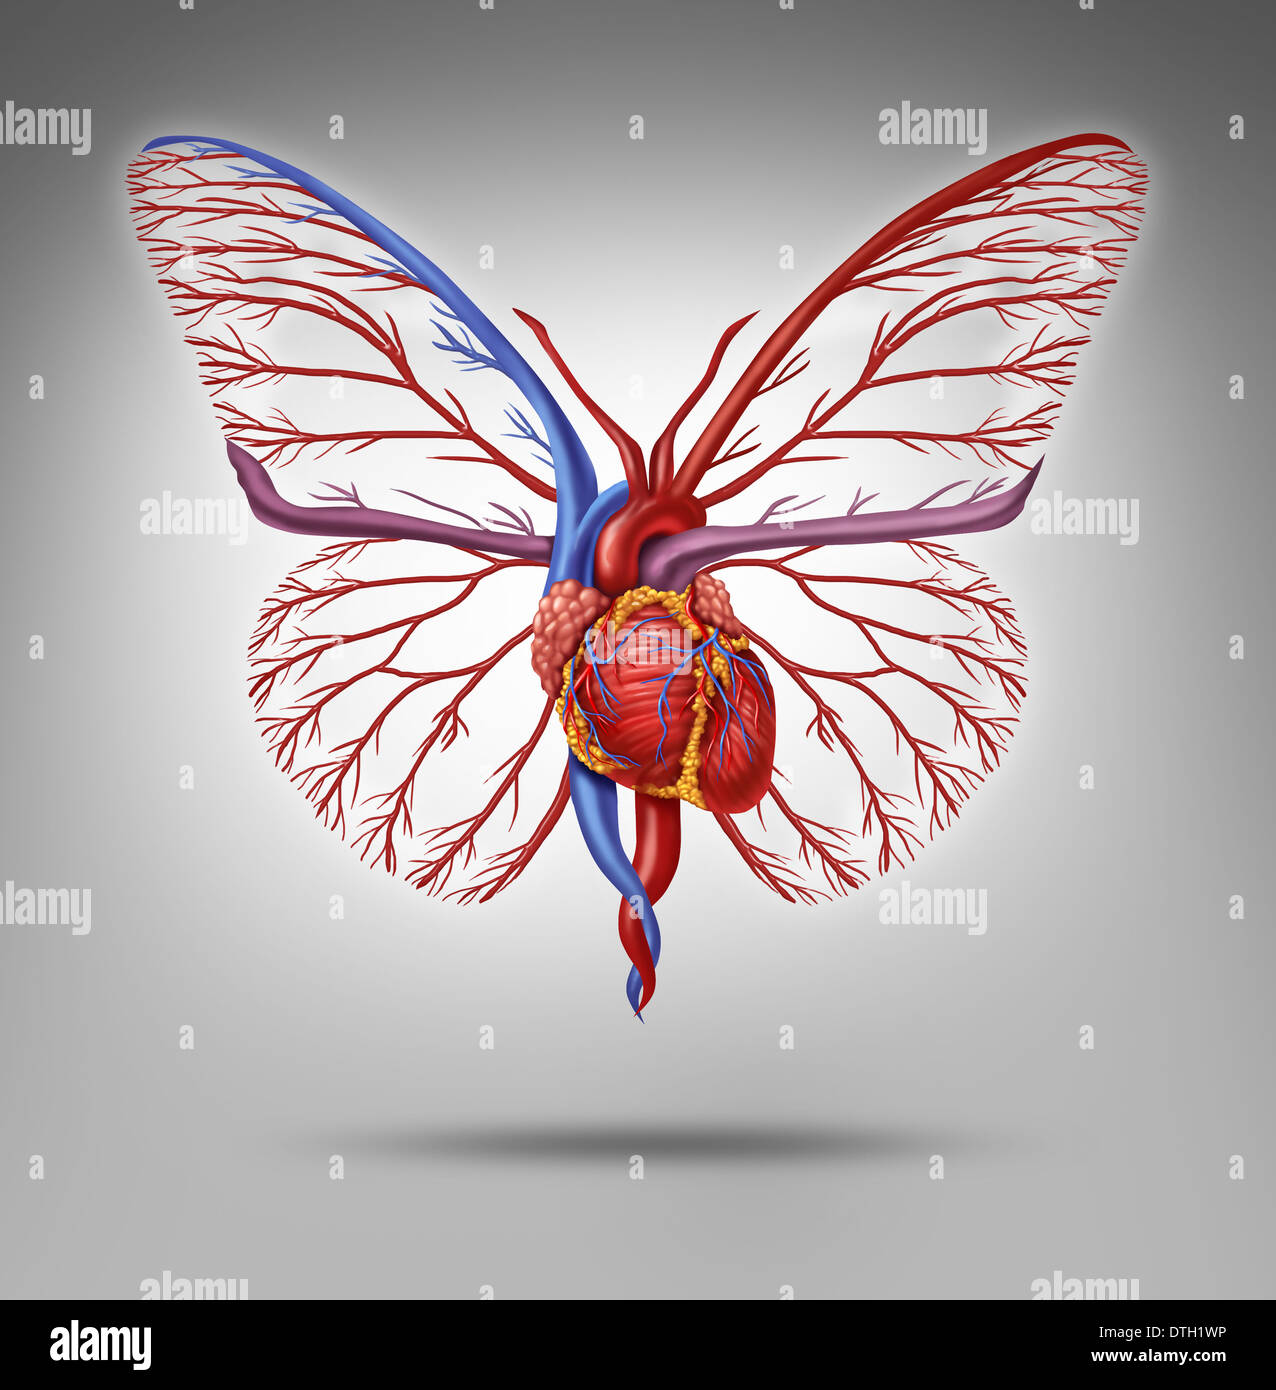 Healthy human lifestyle and cardiovascular research concept as a heart organ shaped as a butterfly with wings flying up as a metaphor for active life and fitness or disease research success. Stock Photo